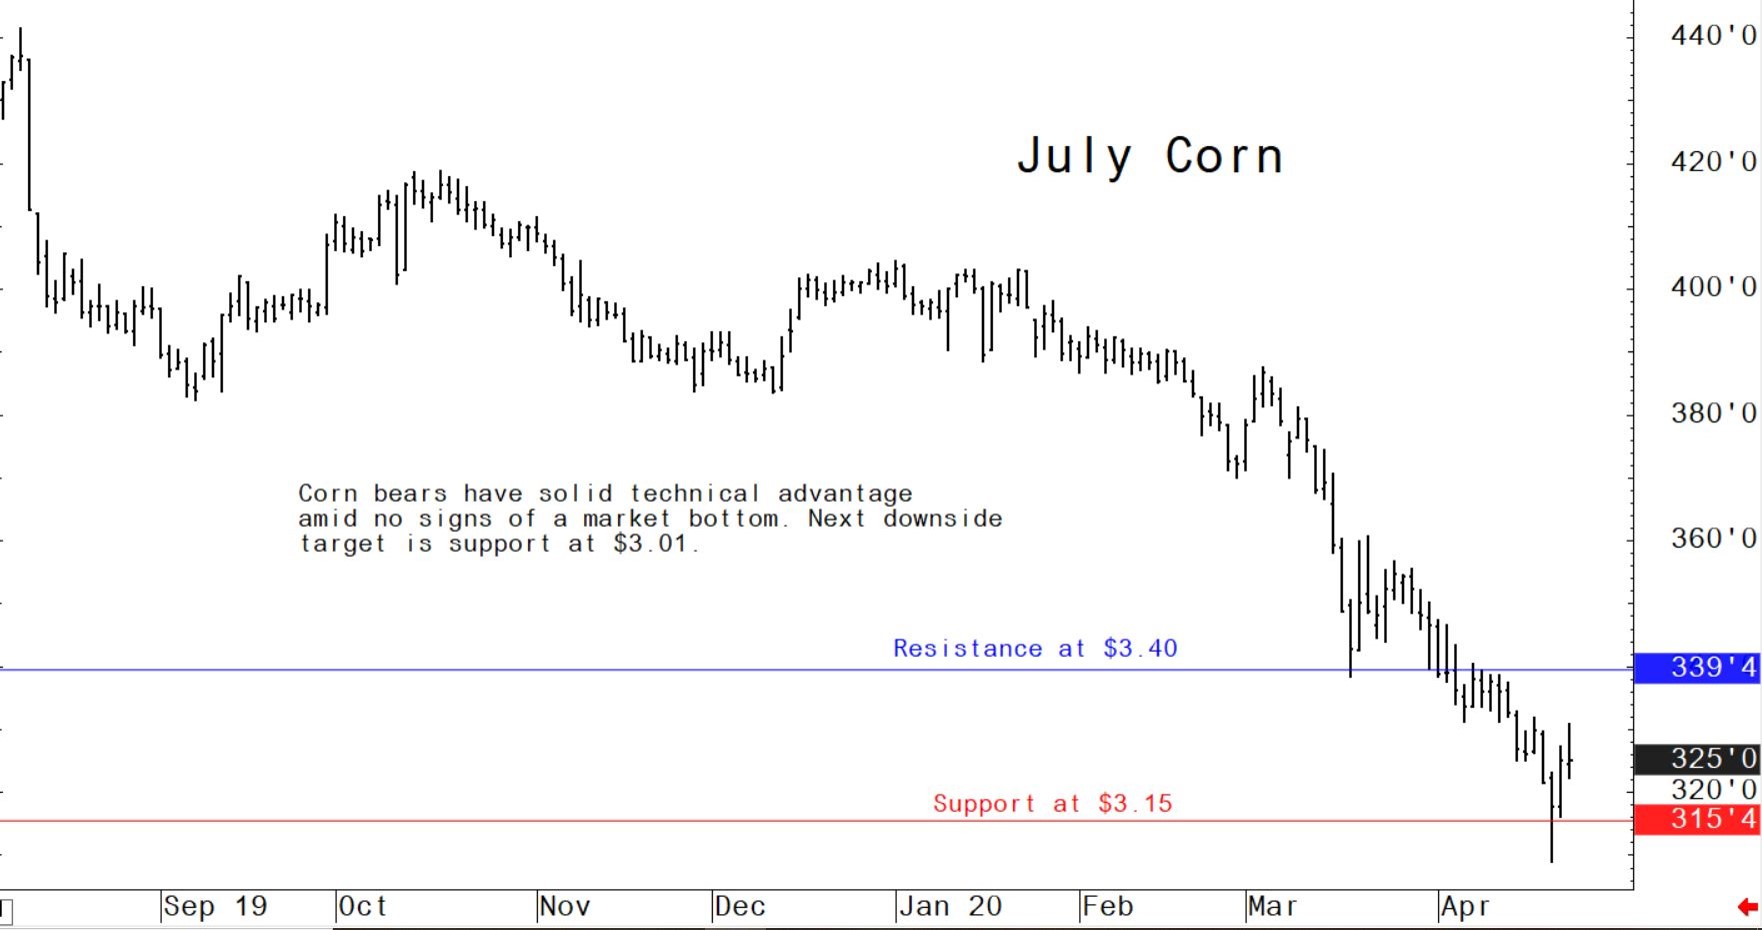 Corn bears have solid technical advantage amid no signs of a market bottom. Next downside target is support at $3.01